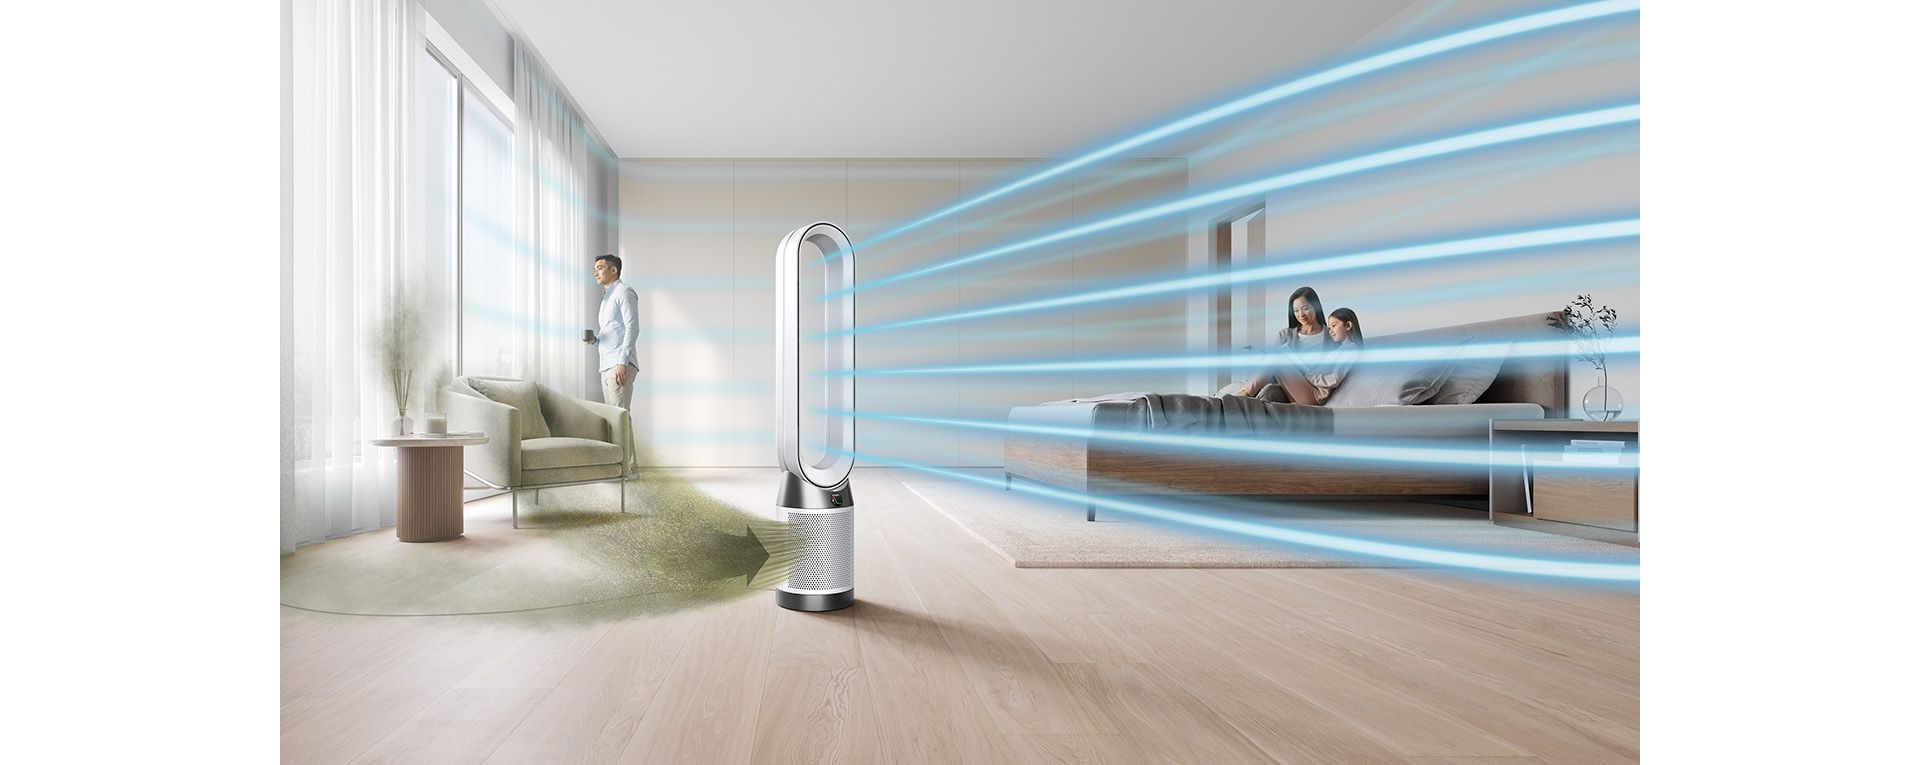 The Dyson Purifier Cool Gen1 purifying a living area.